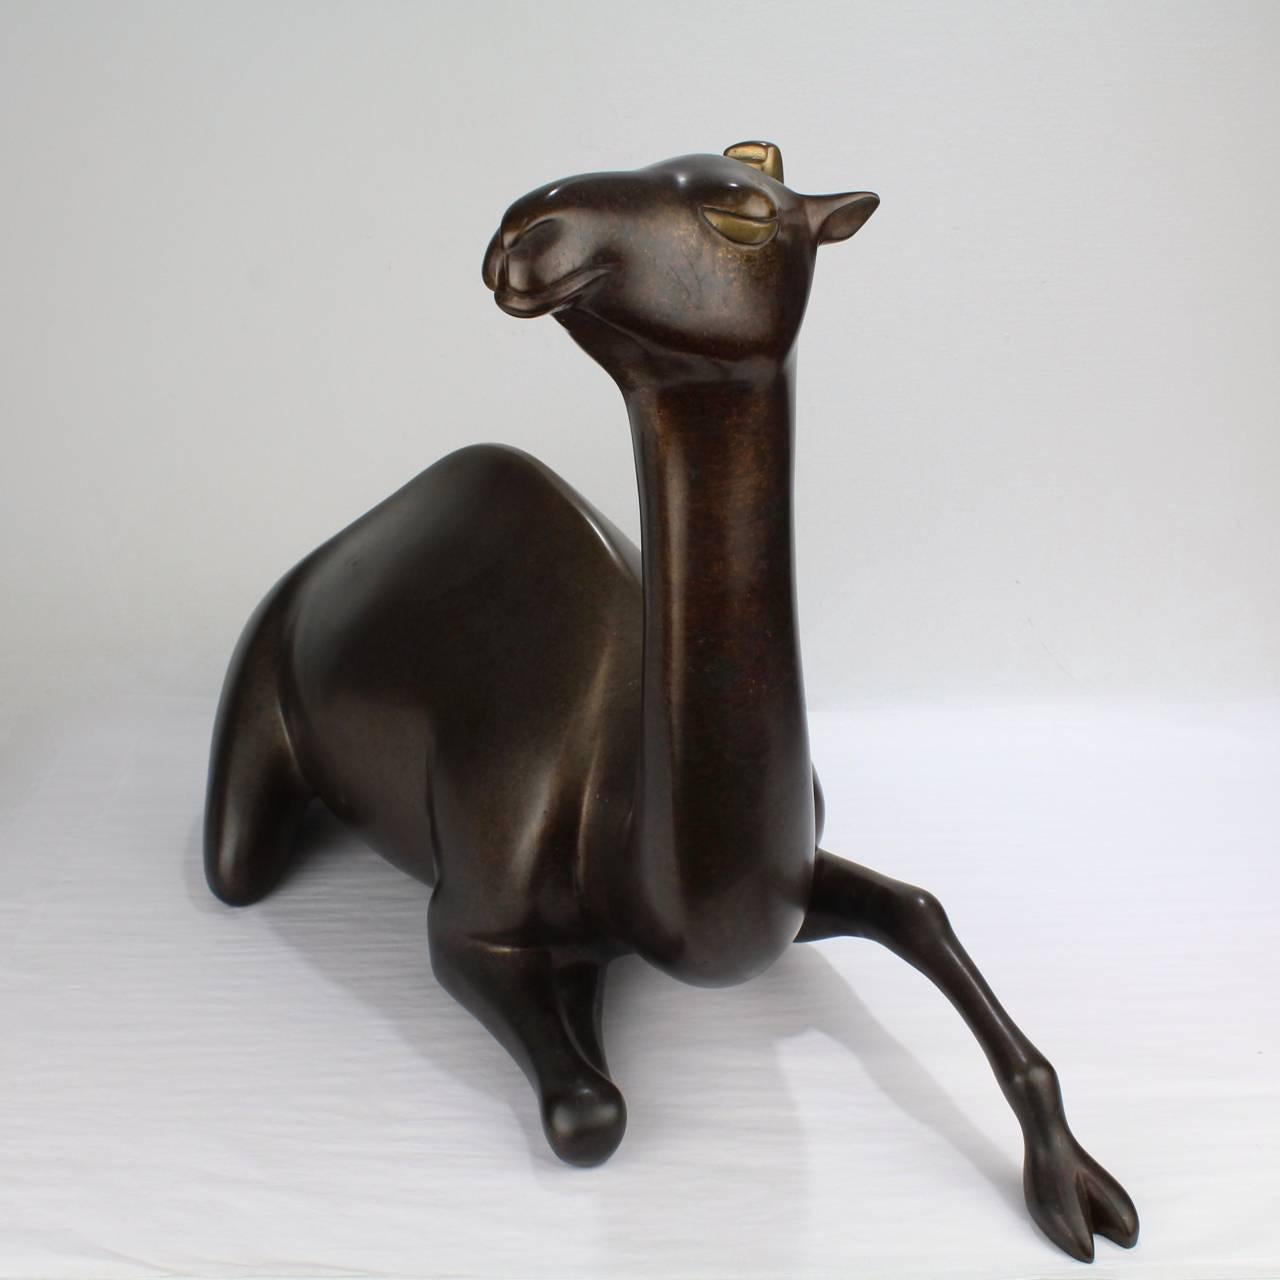 A large limited-edition recumbent camel bronze sculpture by Loet Vanderveen.

With a fantastic, wry expression on the camel's face and a two-tone patina.

Etched signature, copyright, and edition no. 9/350 to the base.

Width ca. 23